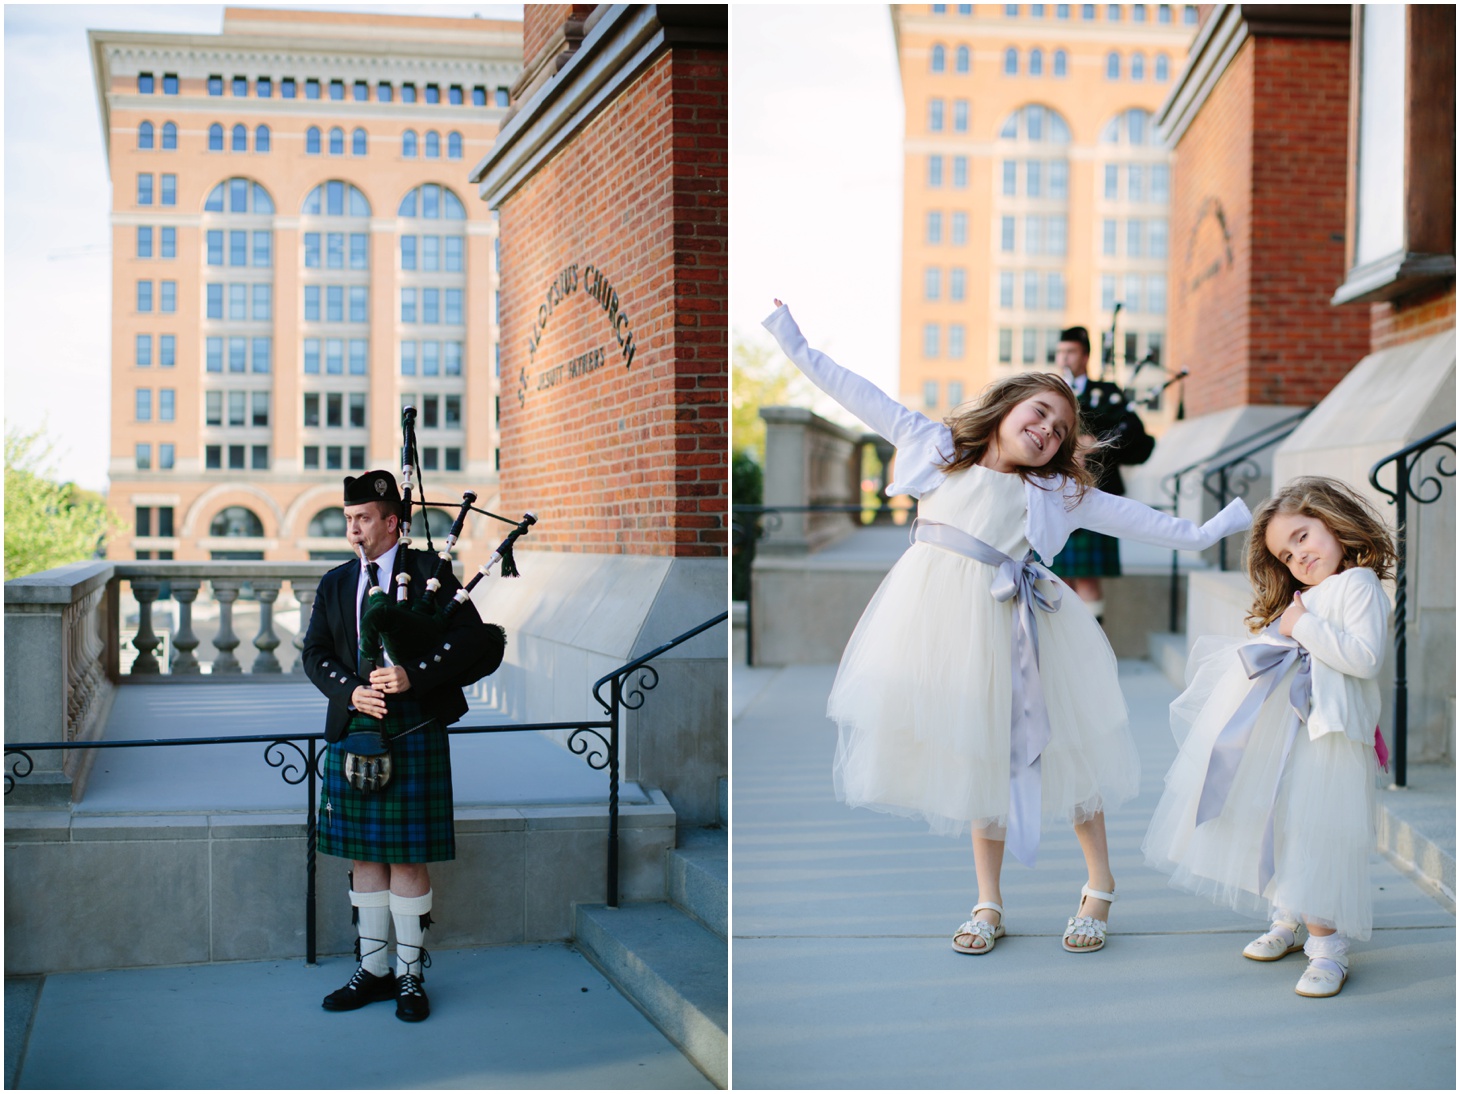 Mikey & Megan, Downtown DC Wedding at National Museum of Women in the Arts by Sarah Bradshaw Photography_0031.jpg